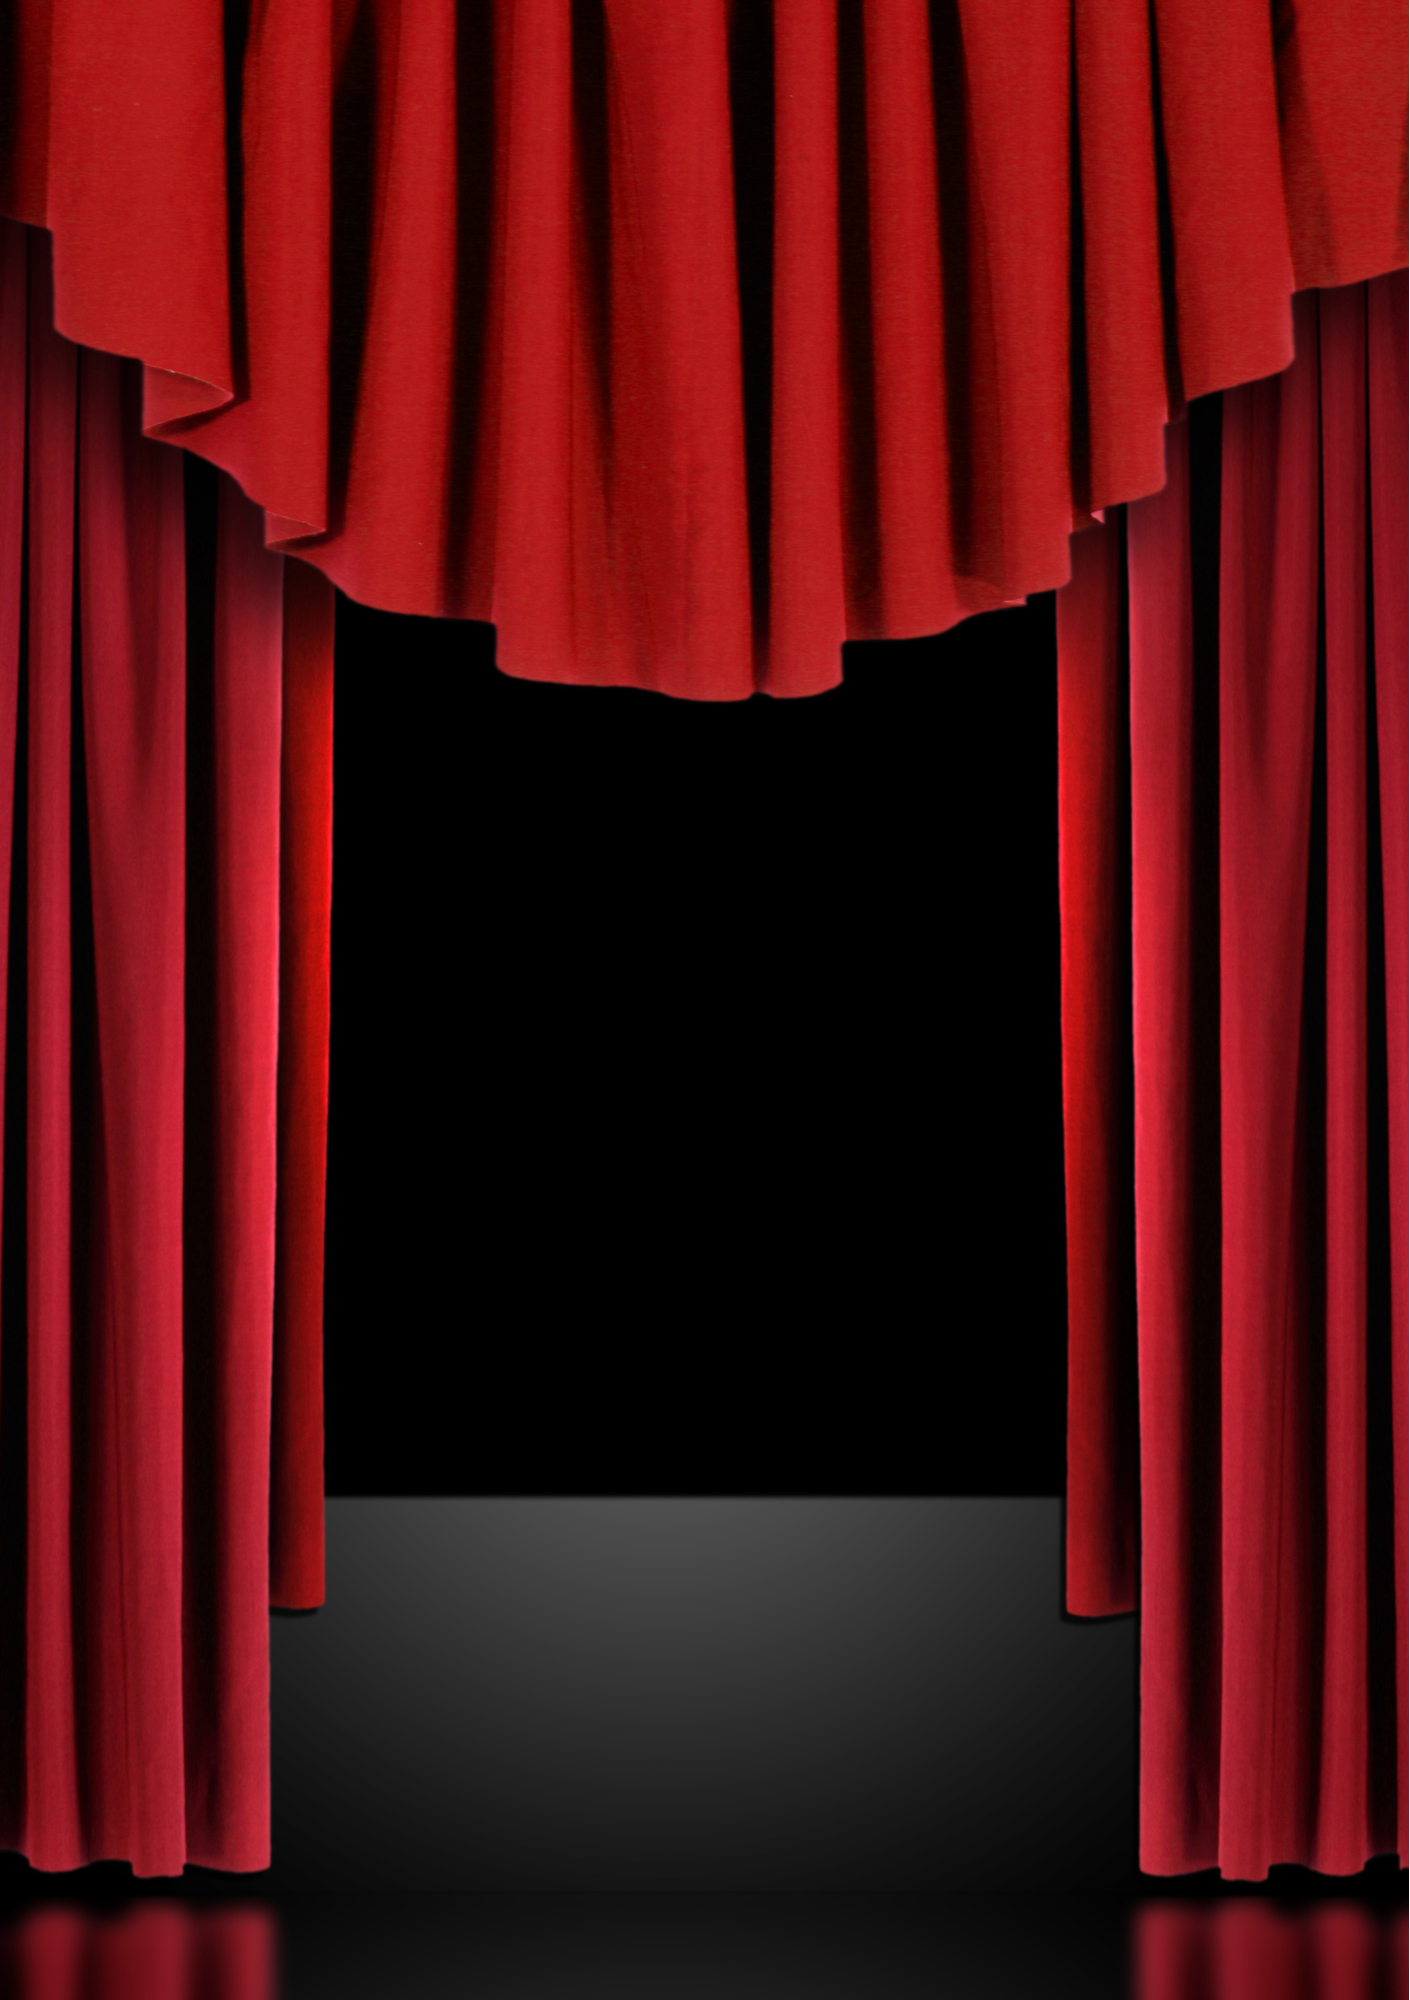 Red theatre curtains